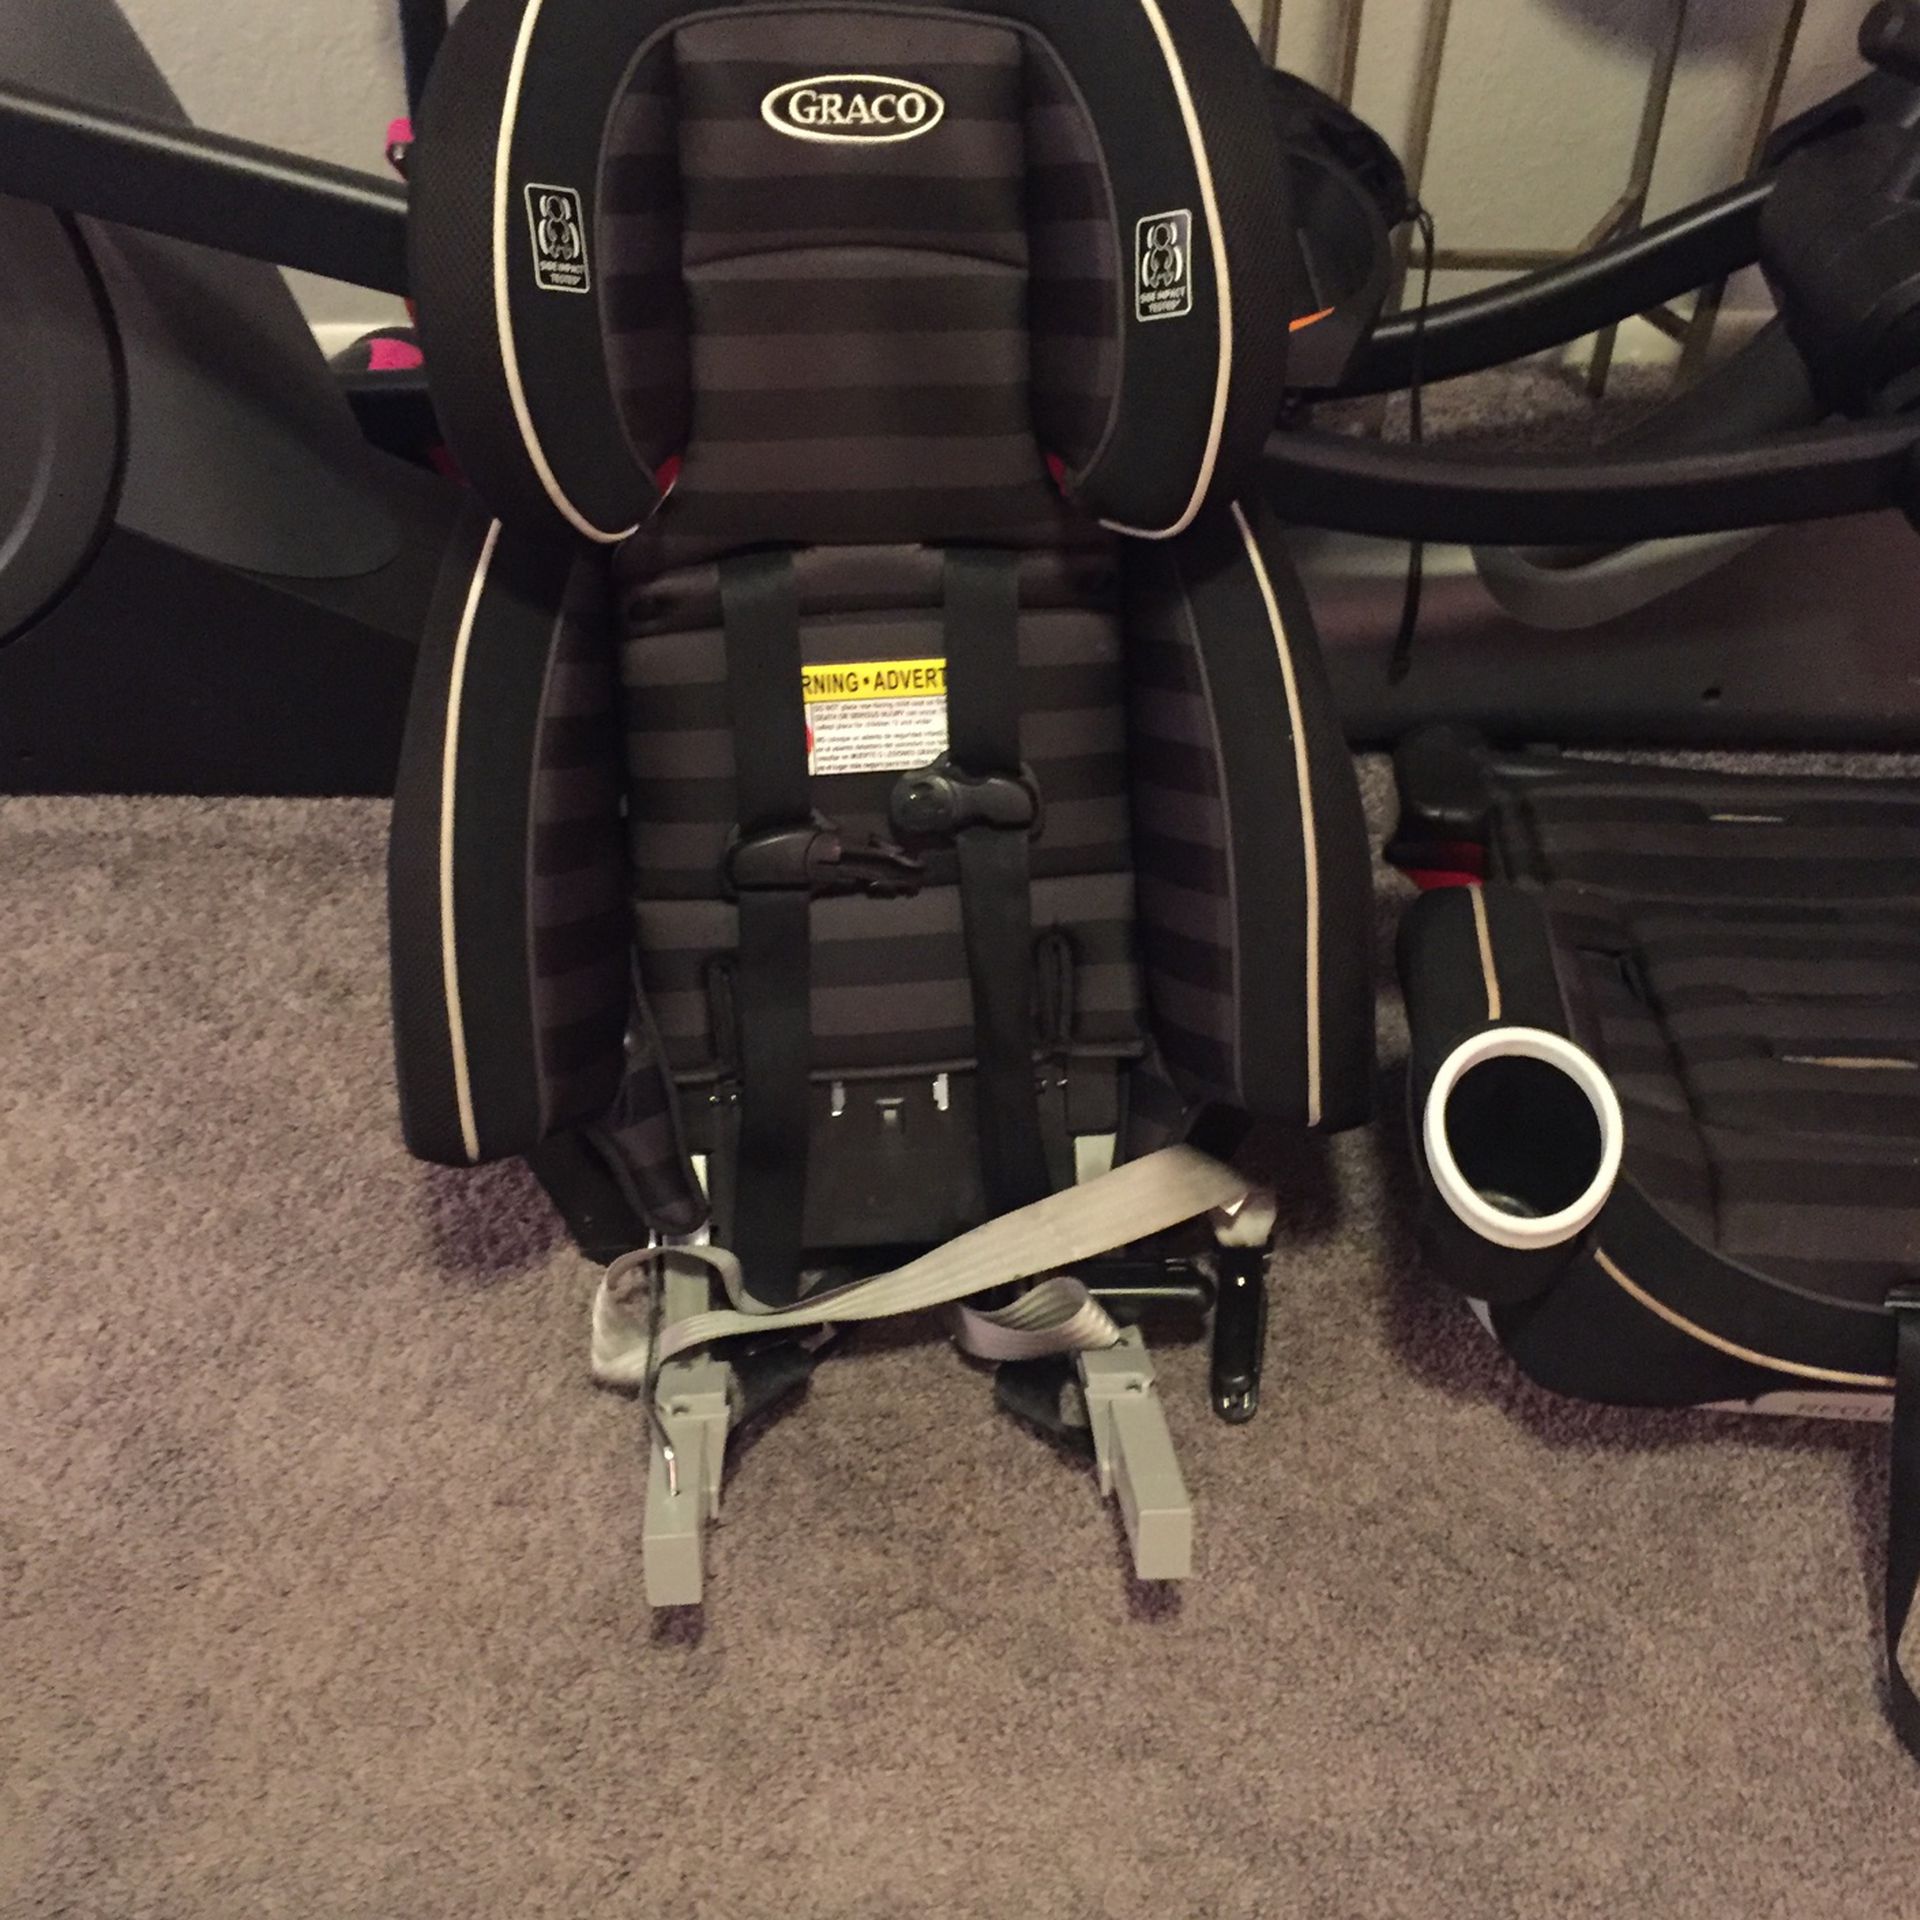 Graco 10 In 1 Forever Car seat / Booster Seat